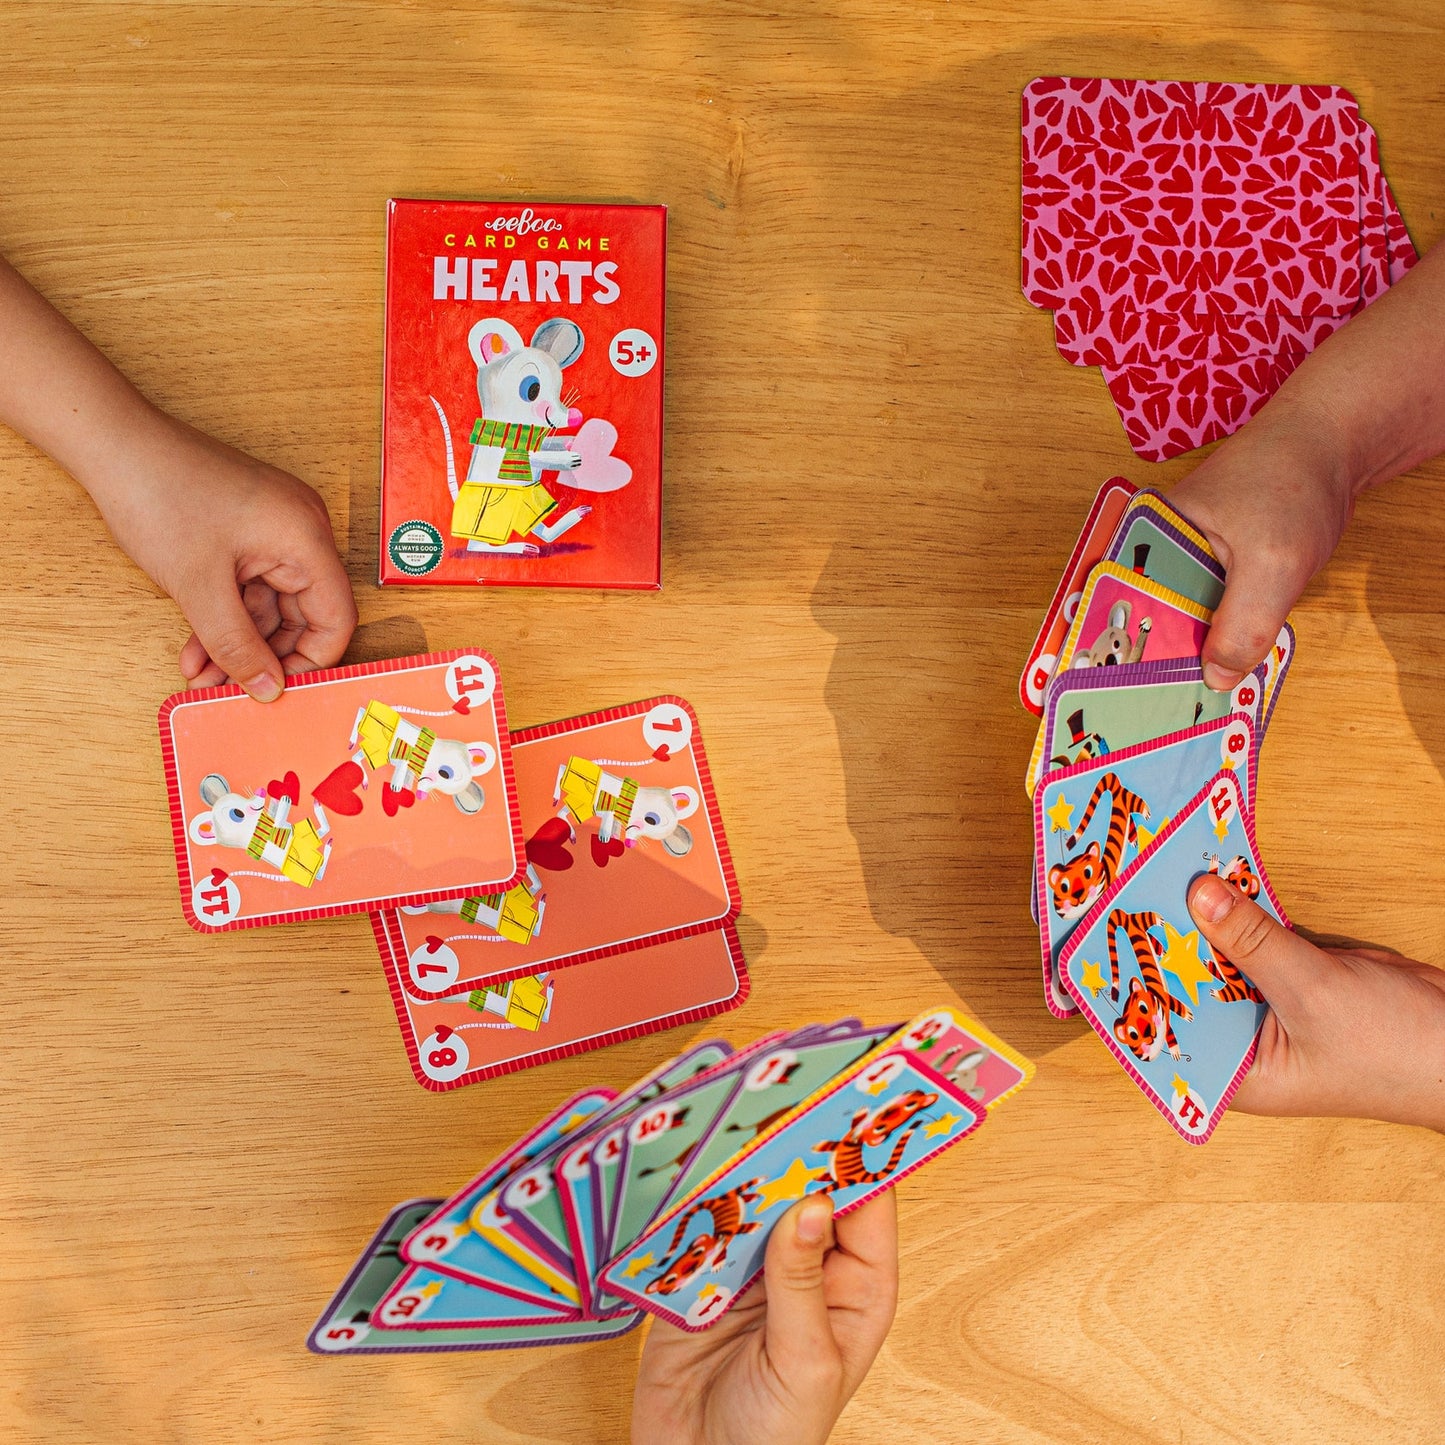 HEARTS PLAYING CARDS